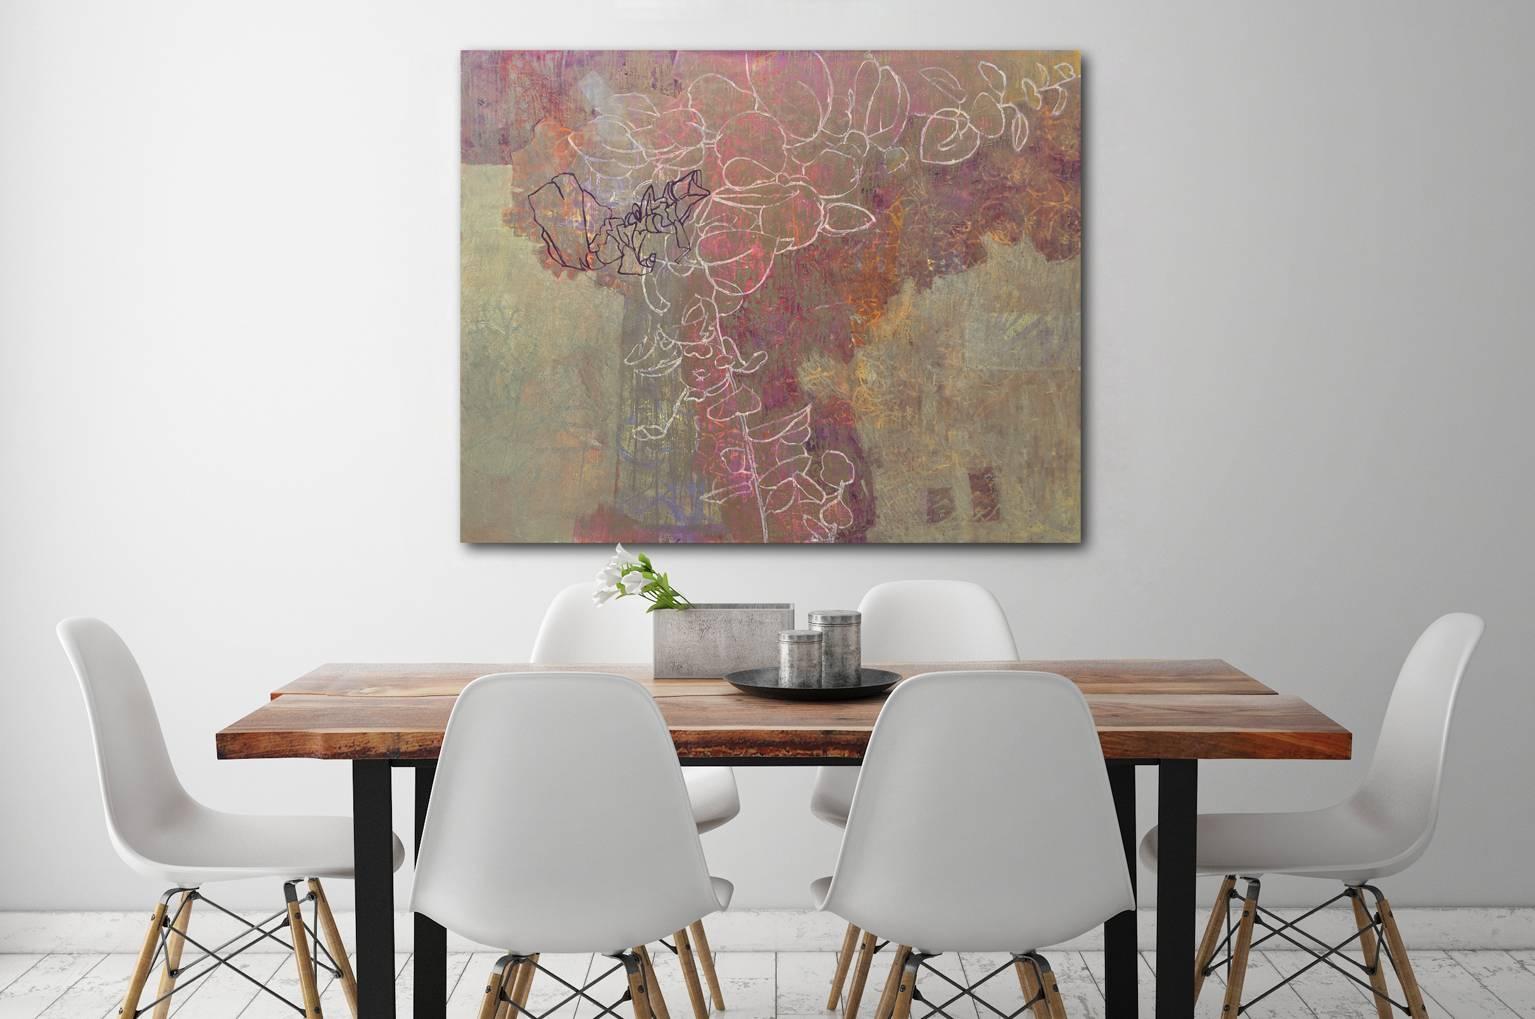 This large abstract painting by Christine Averill-Green is made with oil and gouache on canvas. Warm red, orange and gold come together and create a beautifully textured piece with organic, abstracted botanicals and petals overtop. Inspired by